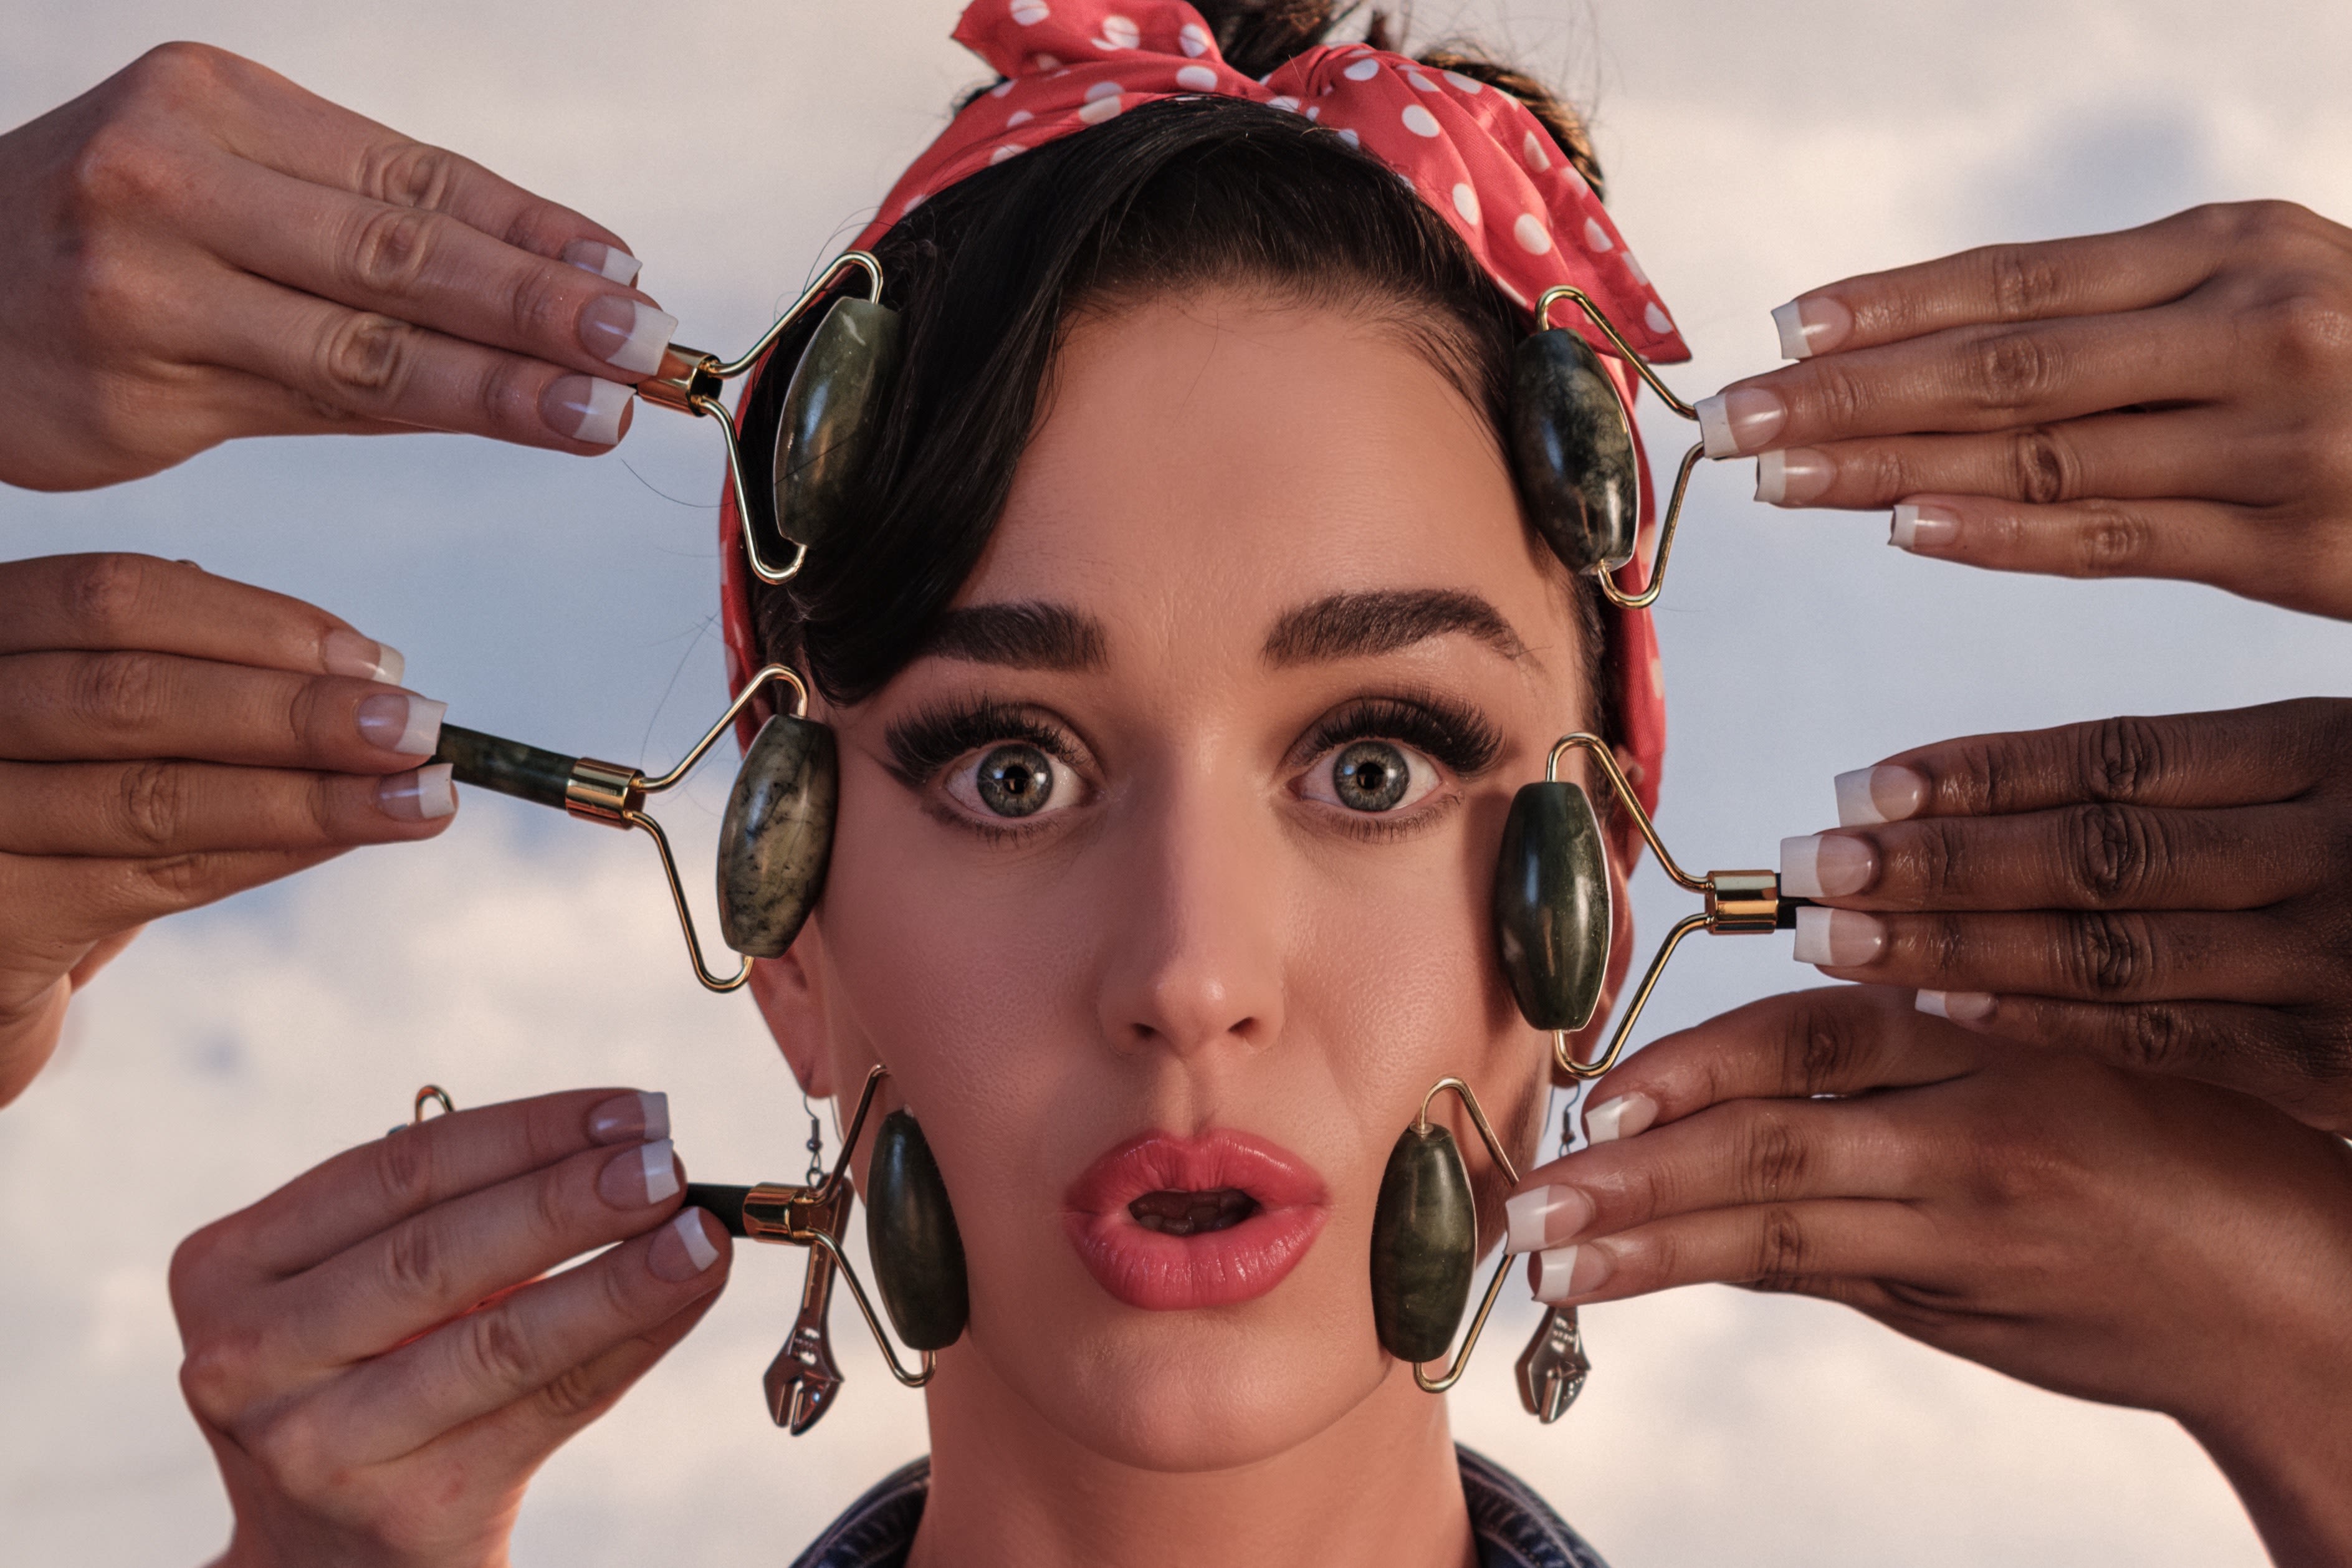 Katy Perry Celebrates the Divine Feminine in ‘Woman’s World’ Video Featuring Trisha Paytas